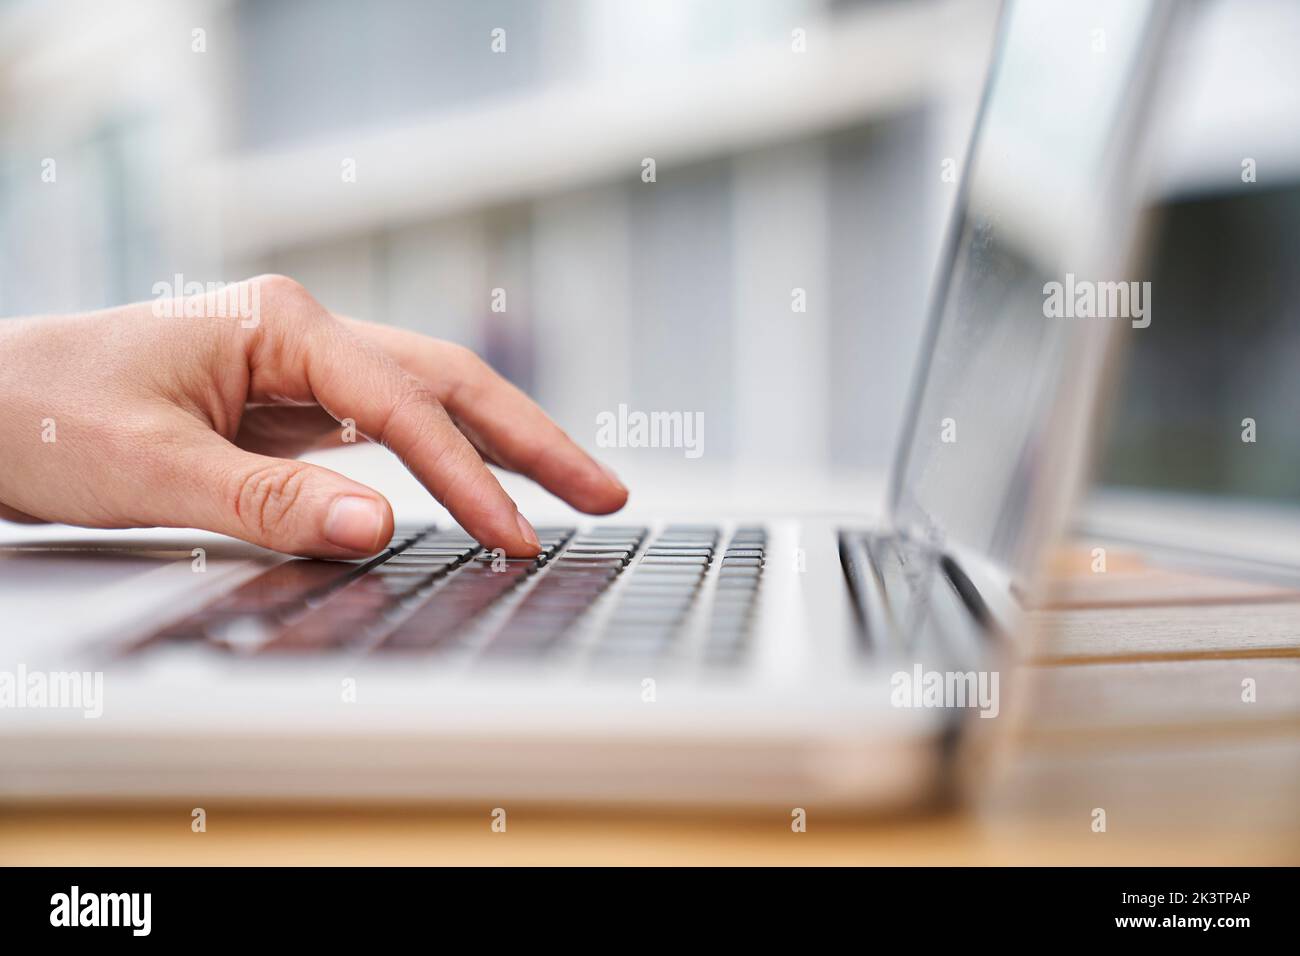 Close-up side view shot of woman's hand typing on a laptop computer Stock Photo